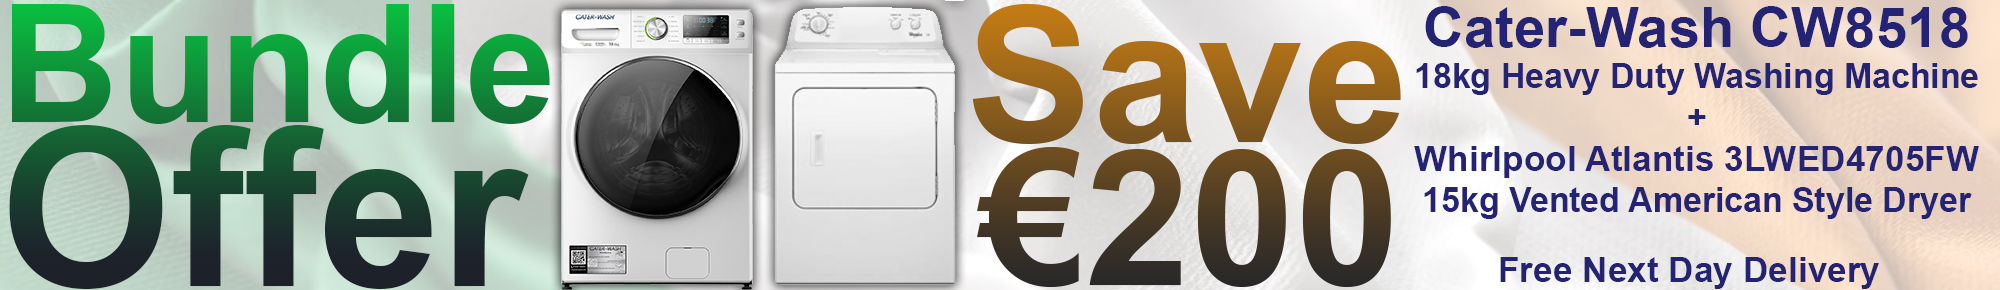 bundle offer for the cw8518 18kg heavy duty washing machine and whirlpool 15kg vented tumble dryer